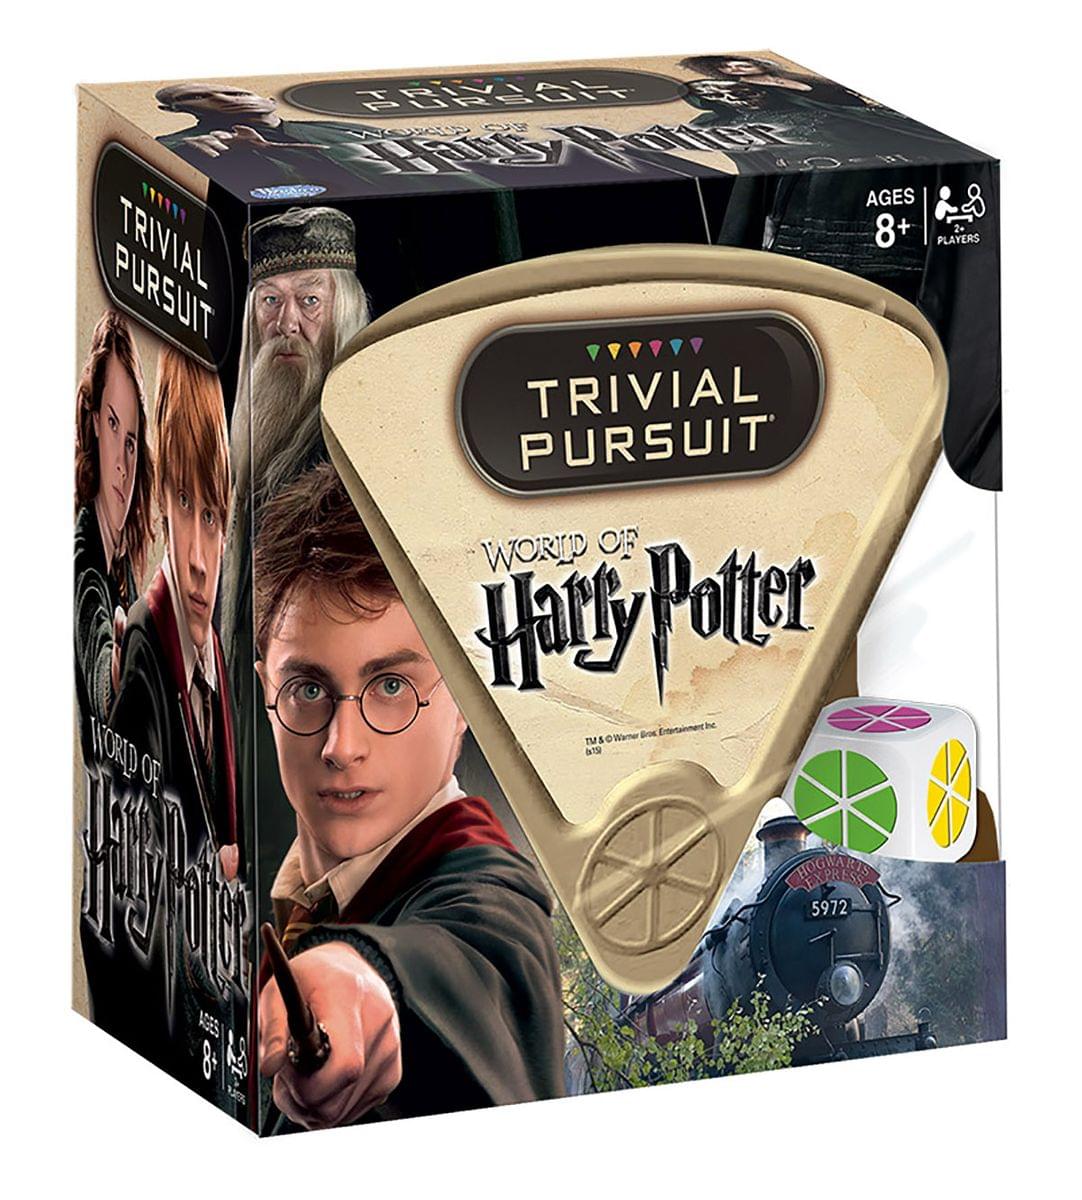 Harry Potter Ultimate Edition Trivial Pursuit Board Game